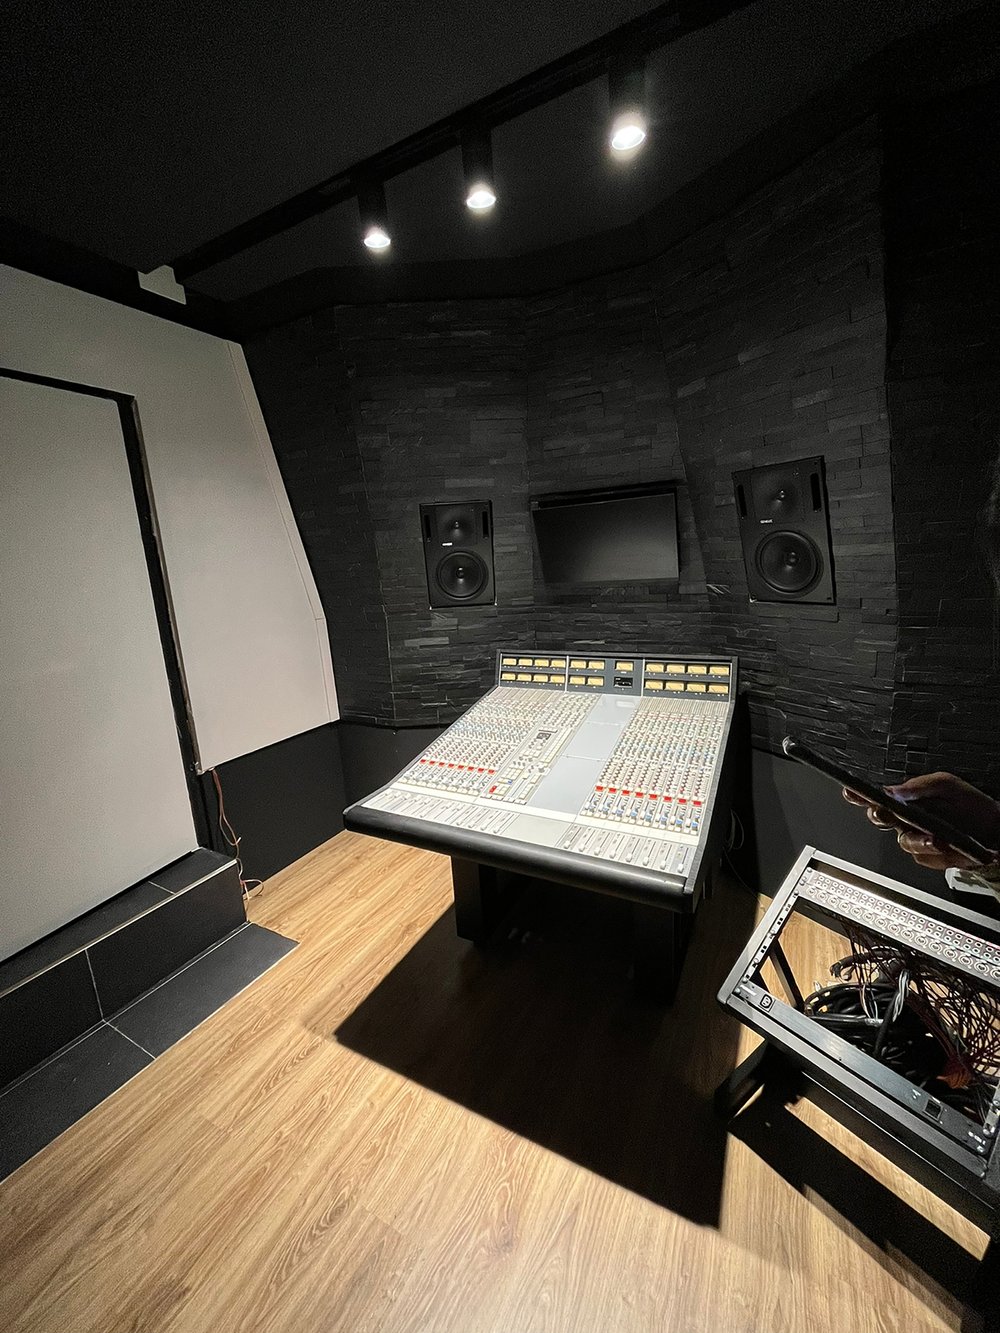 Image of mixing desk and equipment